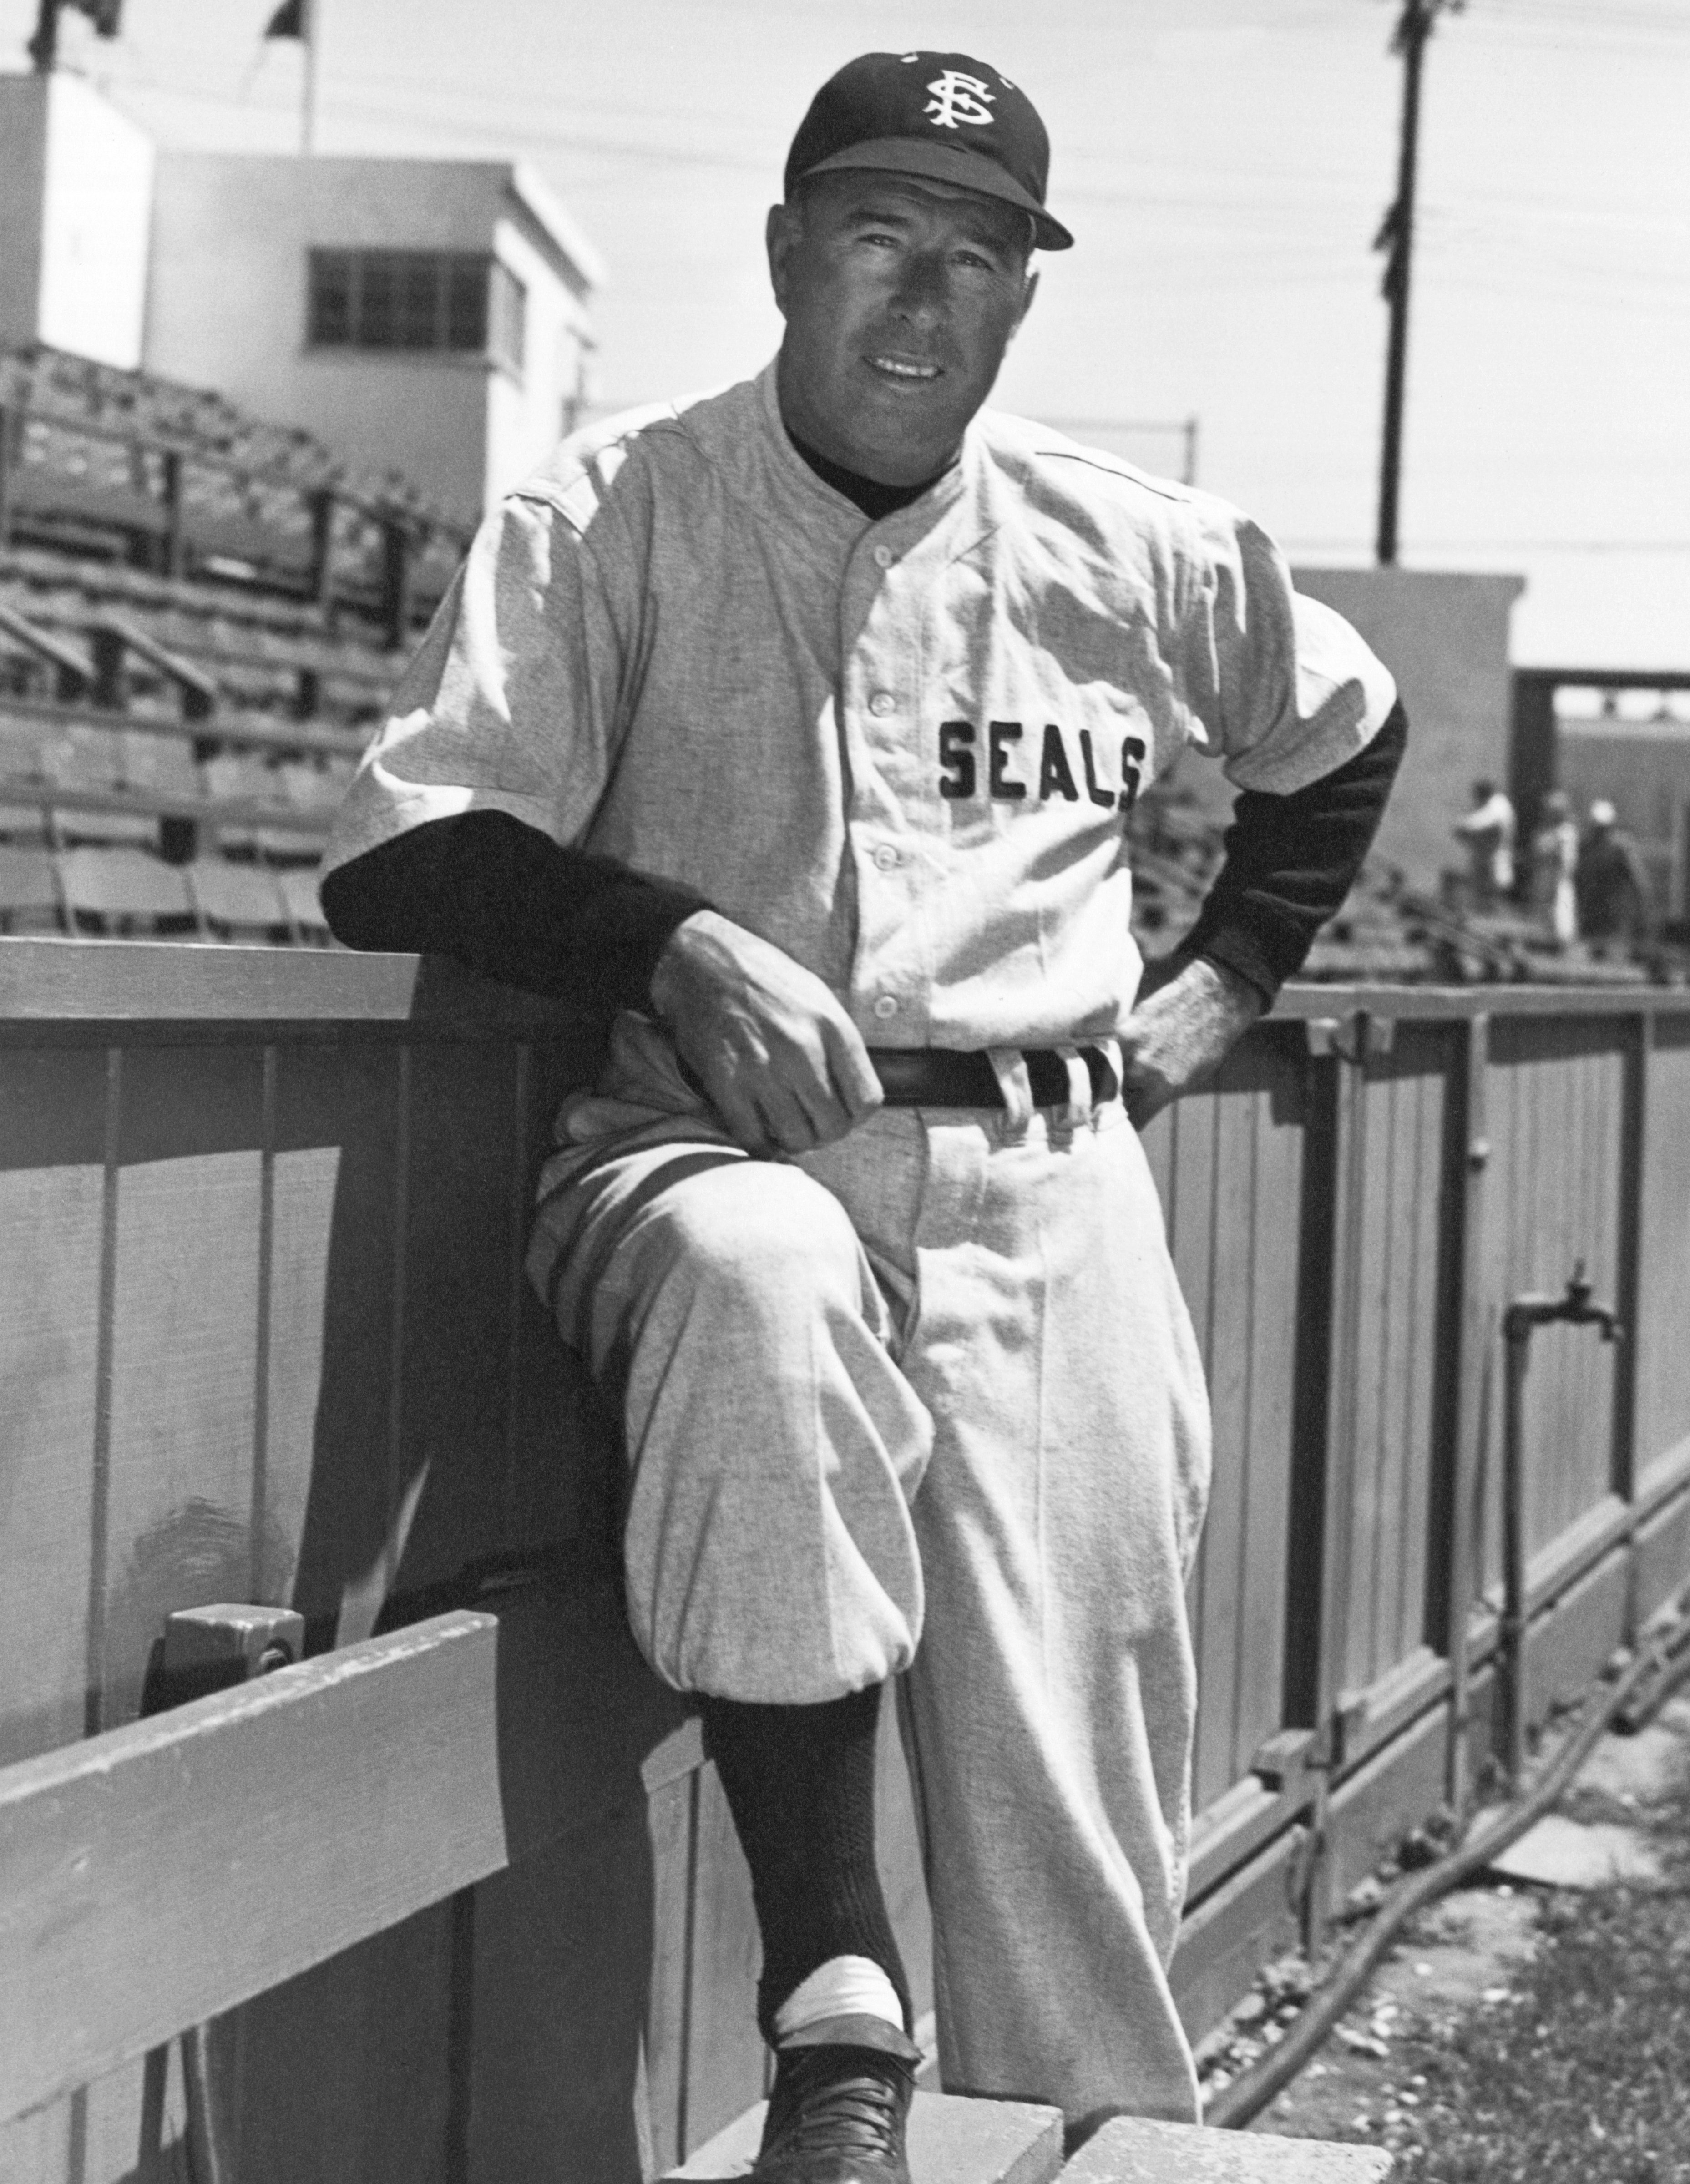 Former major league baseball player and manager of the San Francisco Seals baseball team in the Pacific Coast League, Lefty O'Doul, San Francisco, California, circa 1948 | Photo: Getty Images